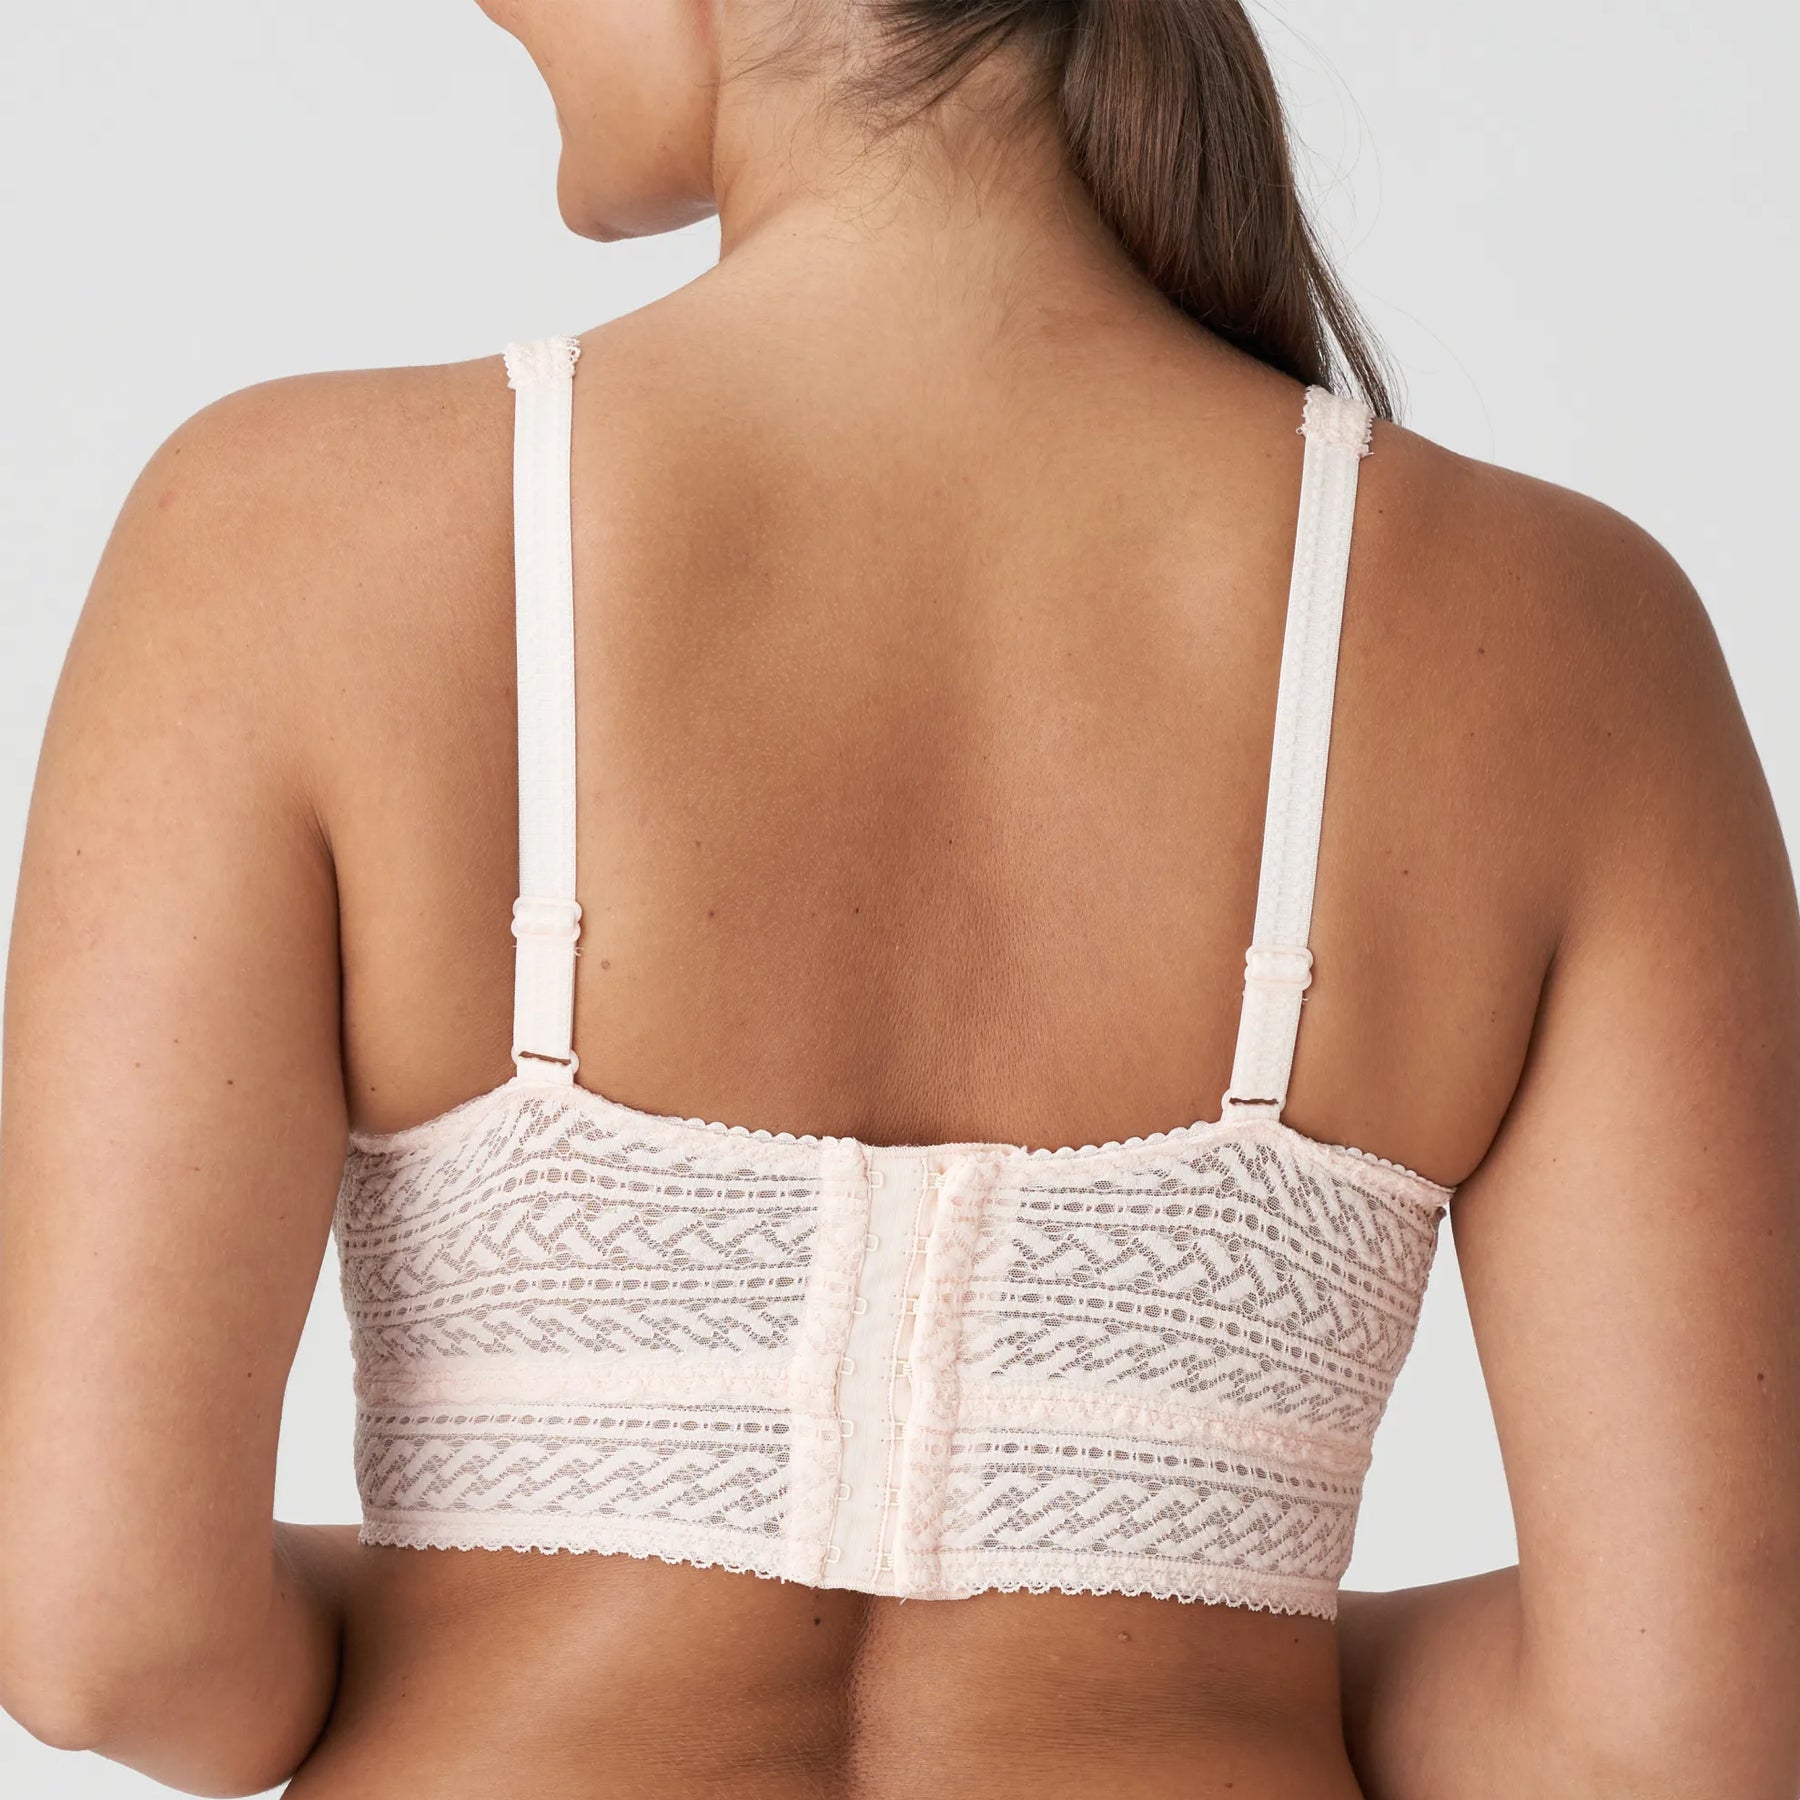 Signature Sheer Padded Wirefree Bra by Triumph Online